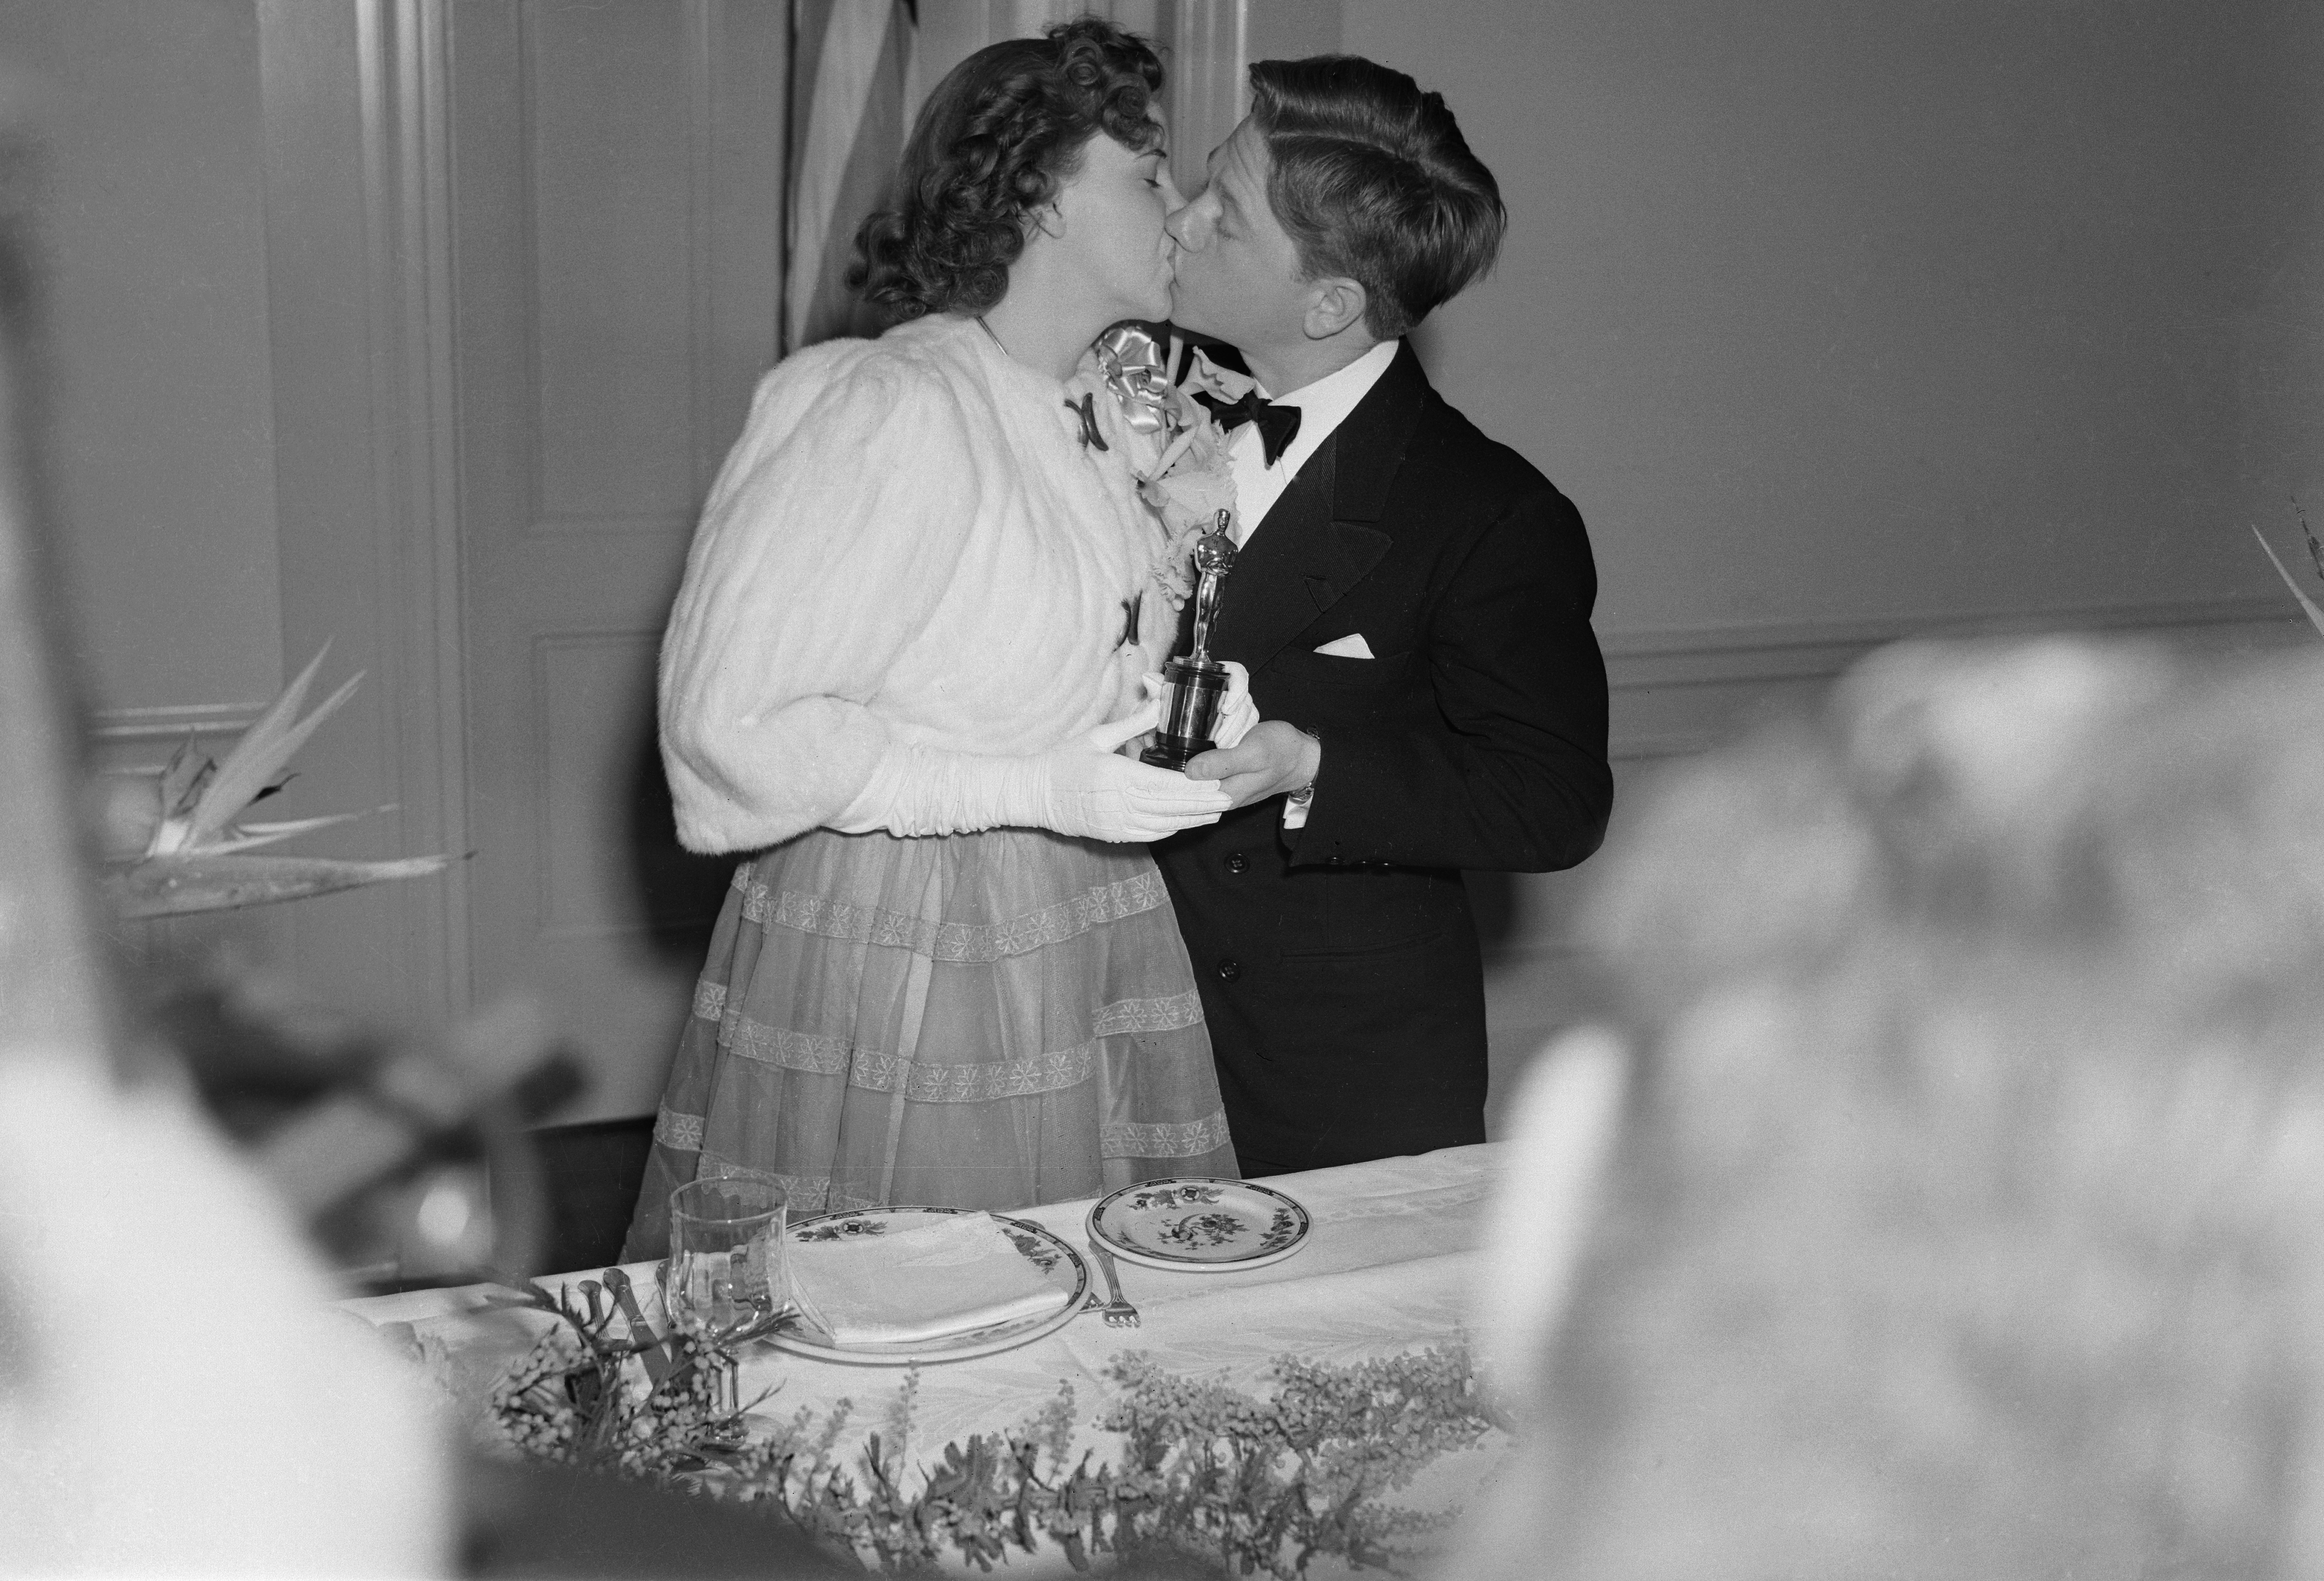 Mickey Rooney, starred in a kiss and presented a special Academy Award to Judy Garland, who was awarded as the best youth actress of 1939 at the 12th Annual Awards Dinner of the Academy of Motion Picture Arts and Sciences, seeing them daily together was rumored that they were a couple, however they assured that it was only friendship (Photo: Bettmann Archive)